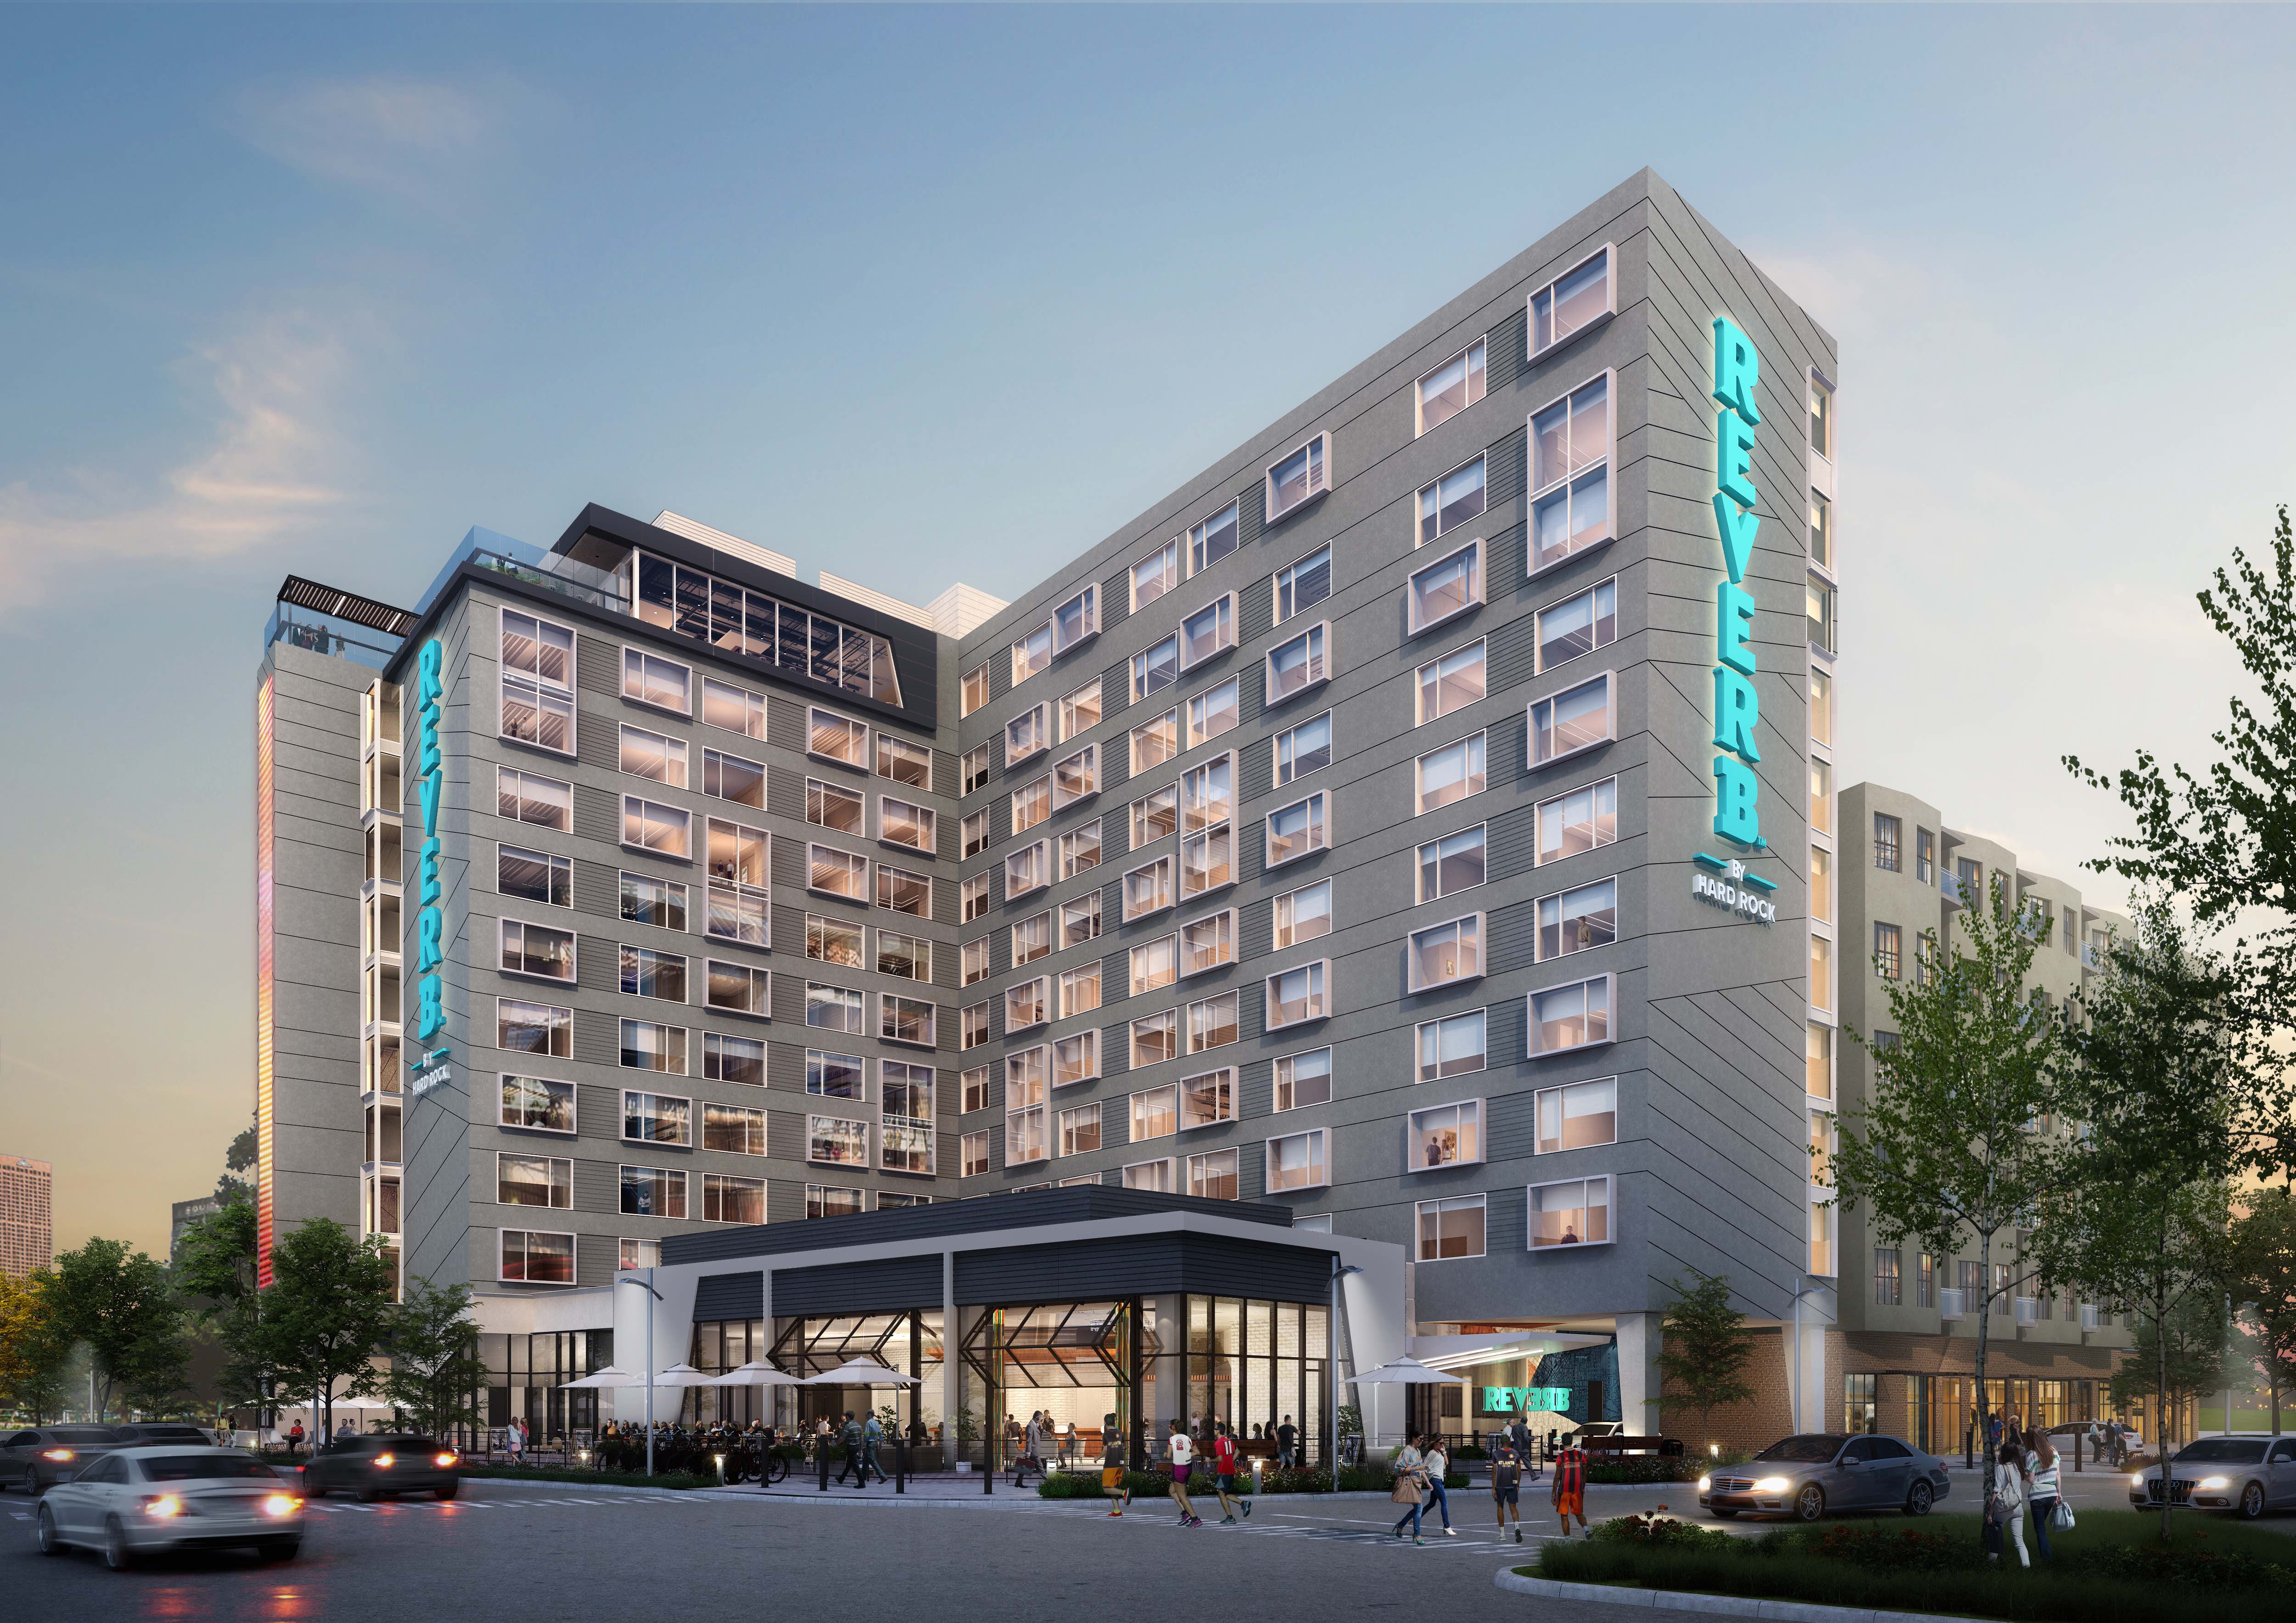 Reverb is anan upscale limited-service brand by Hard Rock Hotels and the proposed Atlanta property will be located adjace